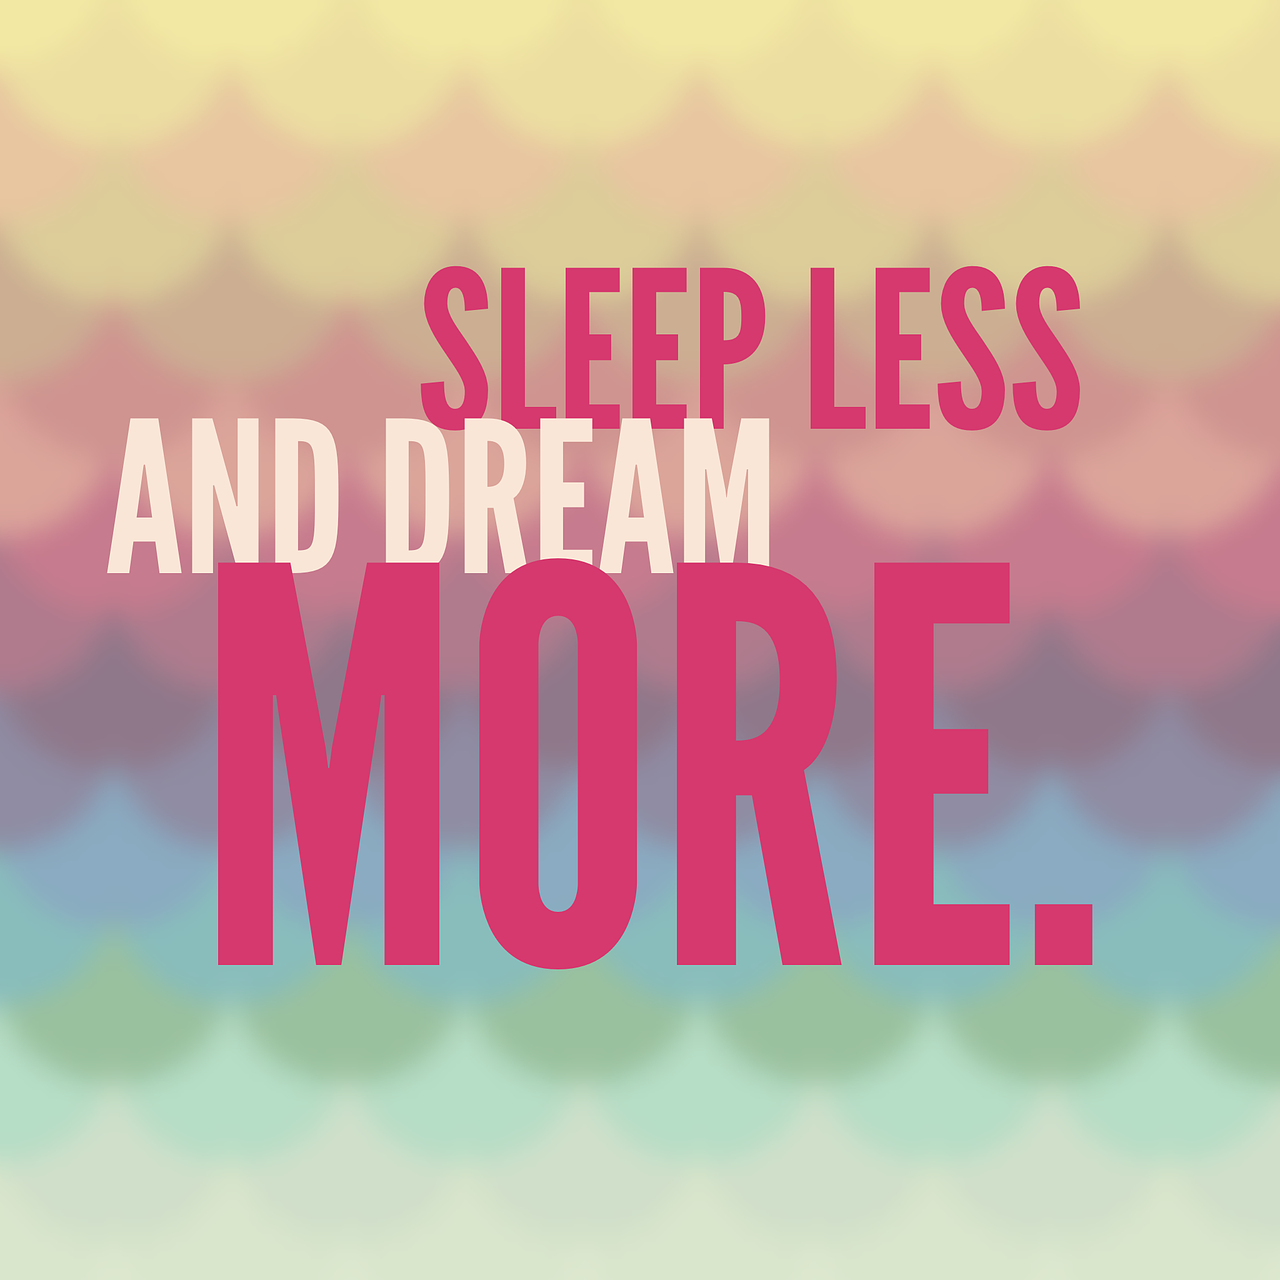 Sleep less and dream more